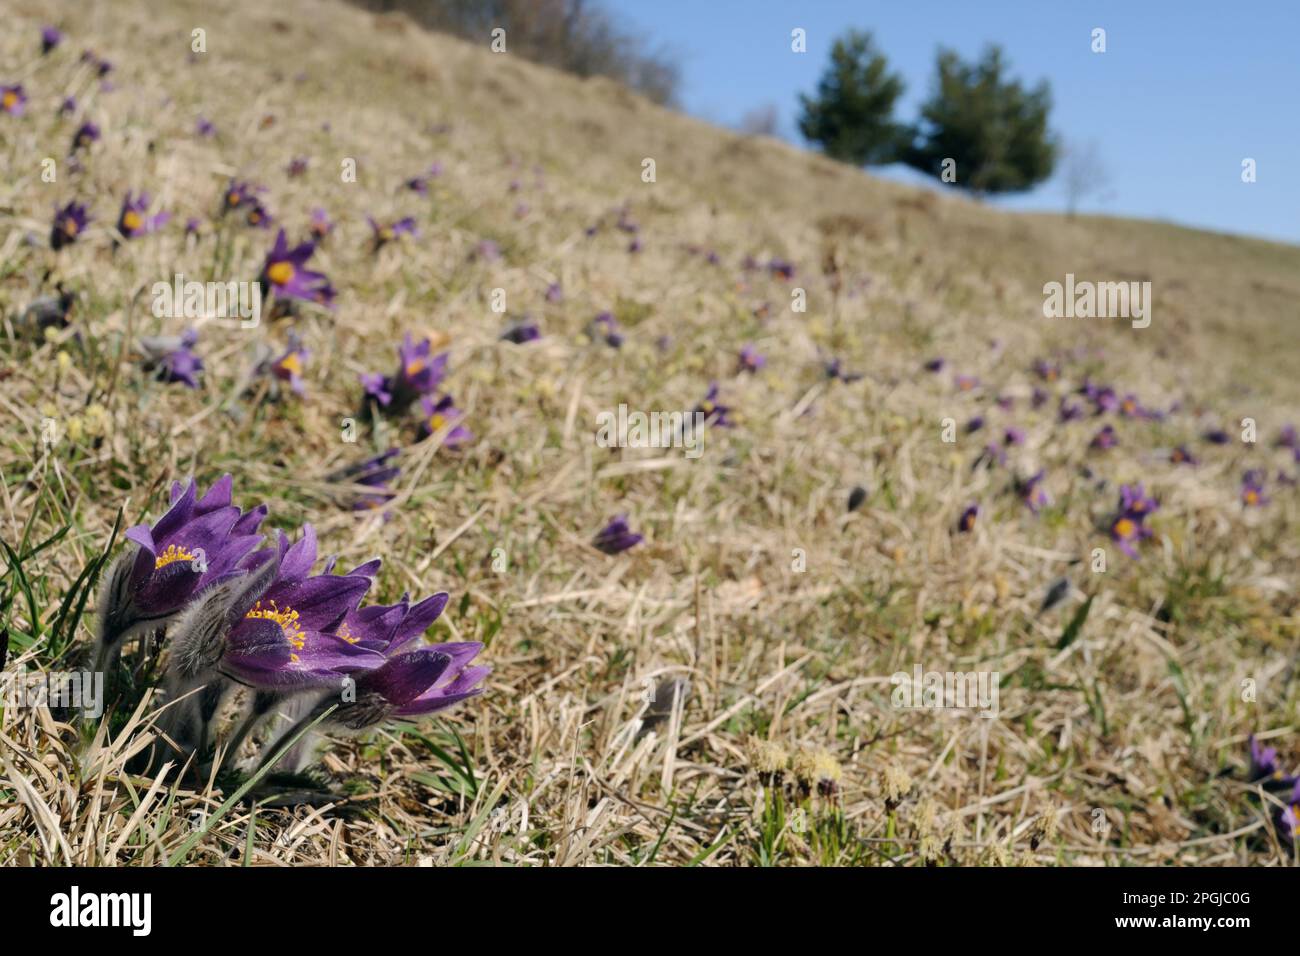 on the Common Pasque Flower slope... Common Pasque Flower on meager dry grassland in the Eifel region. Stock Photo